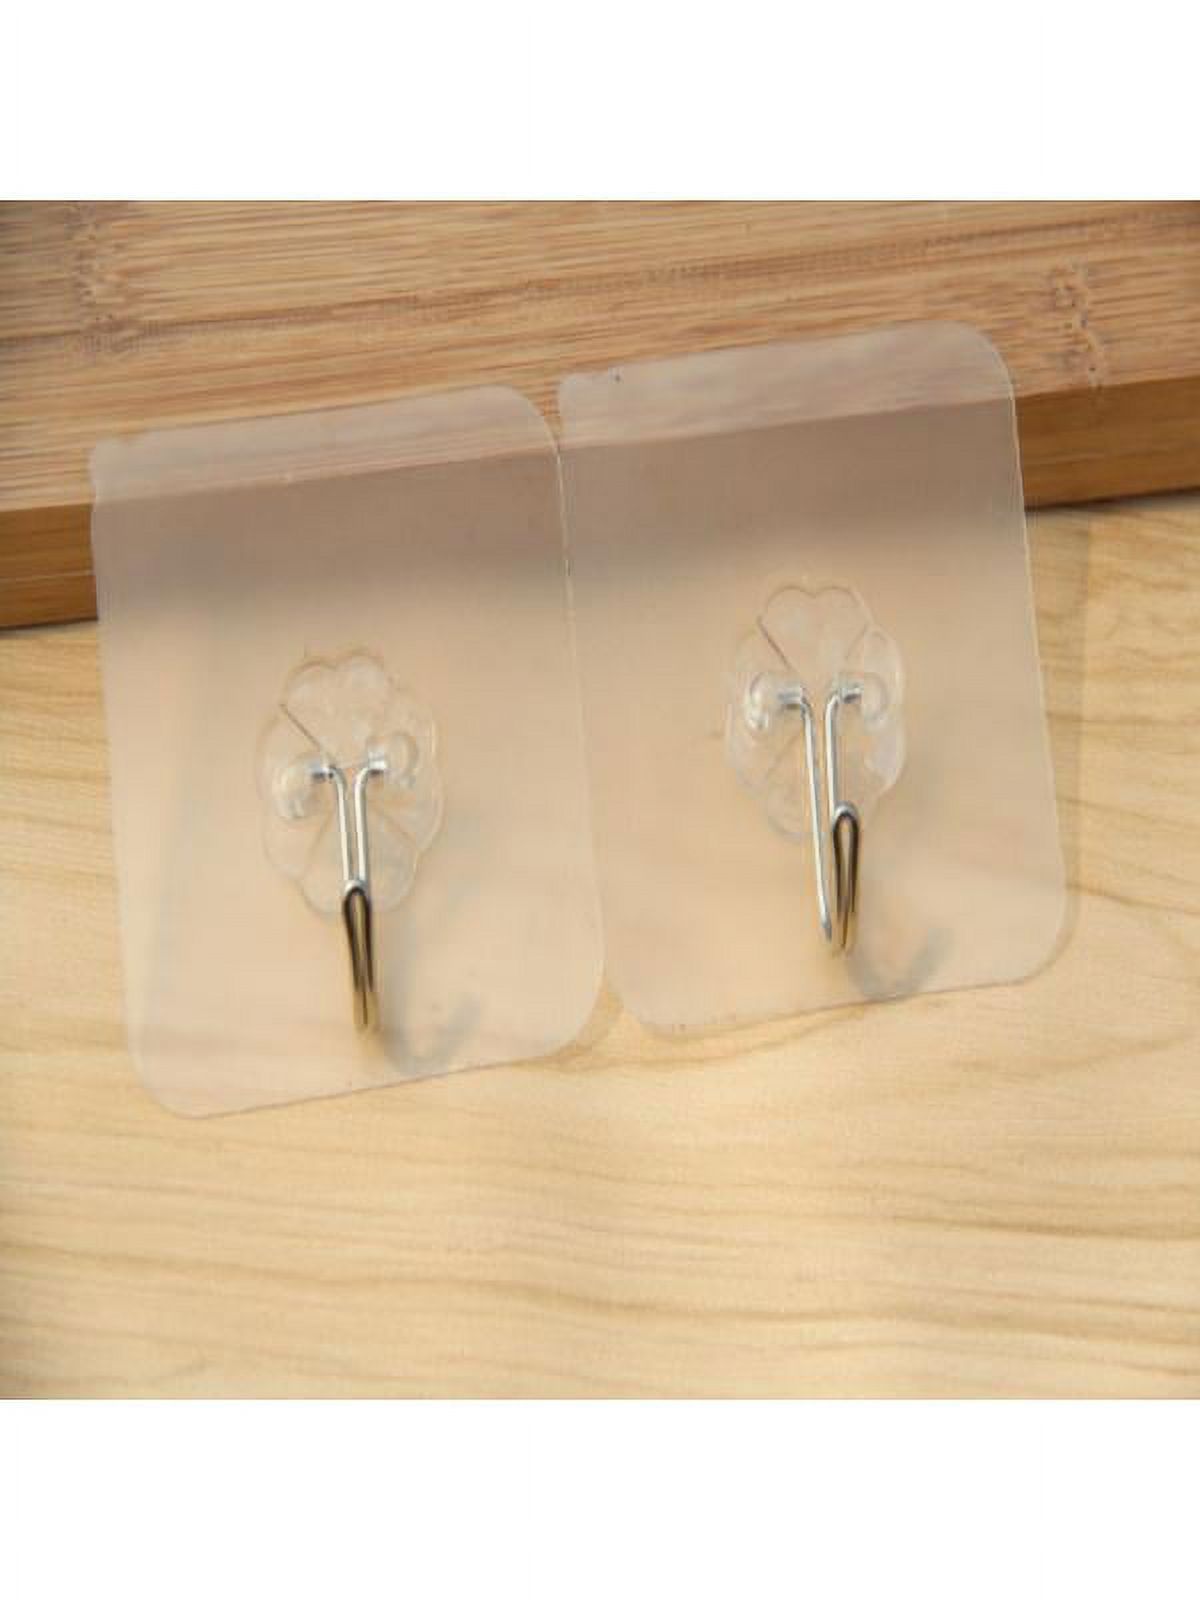 1/2/4/6 Pack Wall Hooks 22lb(Max) Transparent Reusable Seamless Hooks, Waterproof and Oilproof, Bathroom Kitchen Heavy Duty Self Adhesive Hooks - image 4 of 6